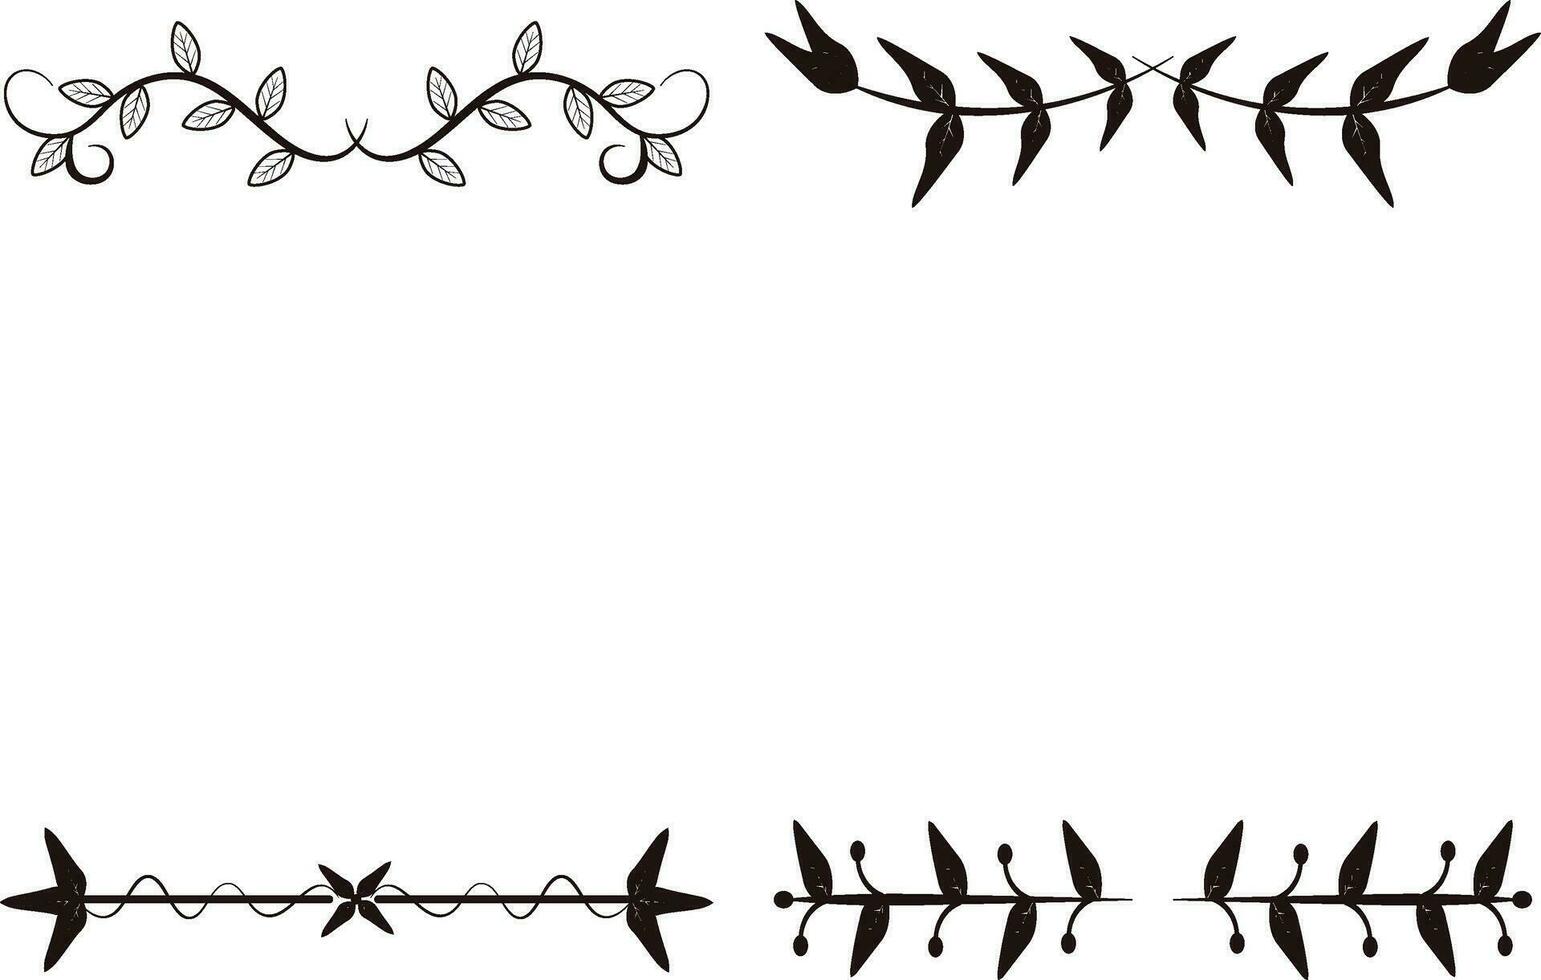 Floral Divider, Borders with Branches, Plants and Flowers. Decoration Outline Vector Illustration. Flower Divider Collection